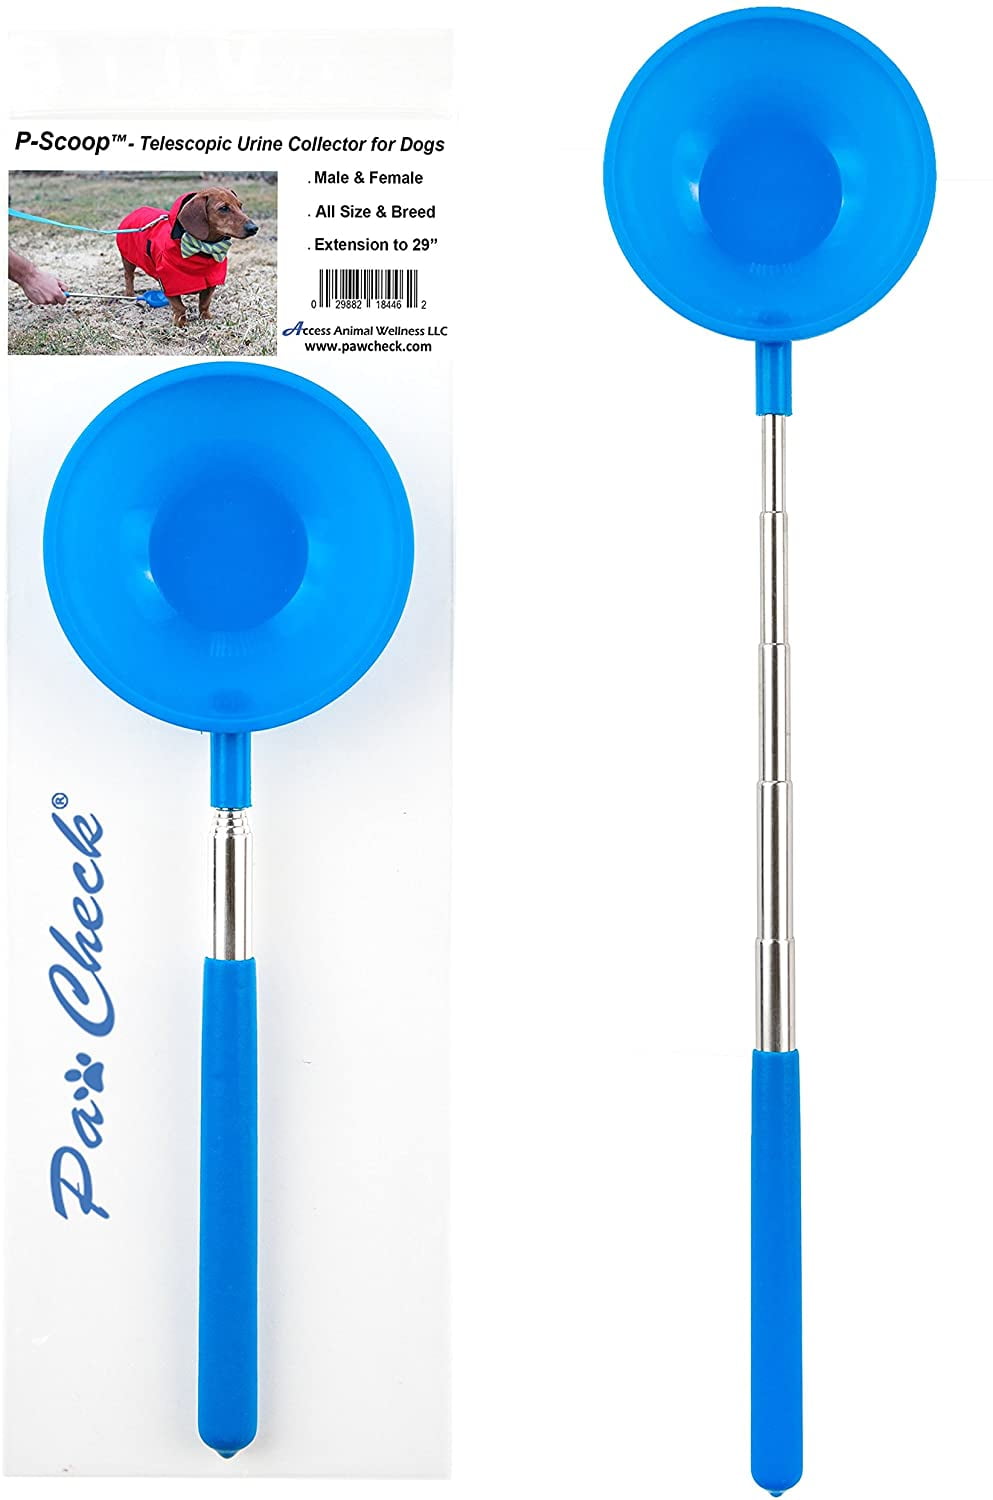 Pawcheck - P-Scoop Dog Urine Collector - Telescopic Urine Catcher for Dogs,  Extends to 29